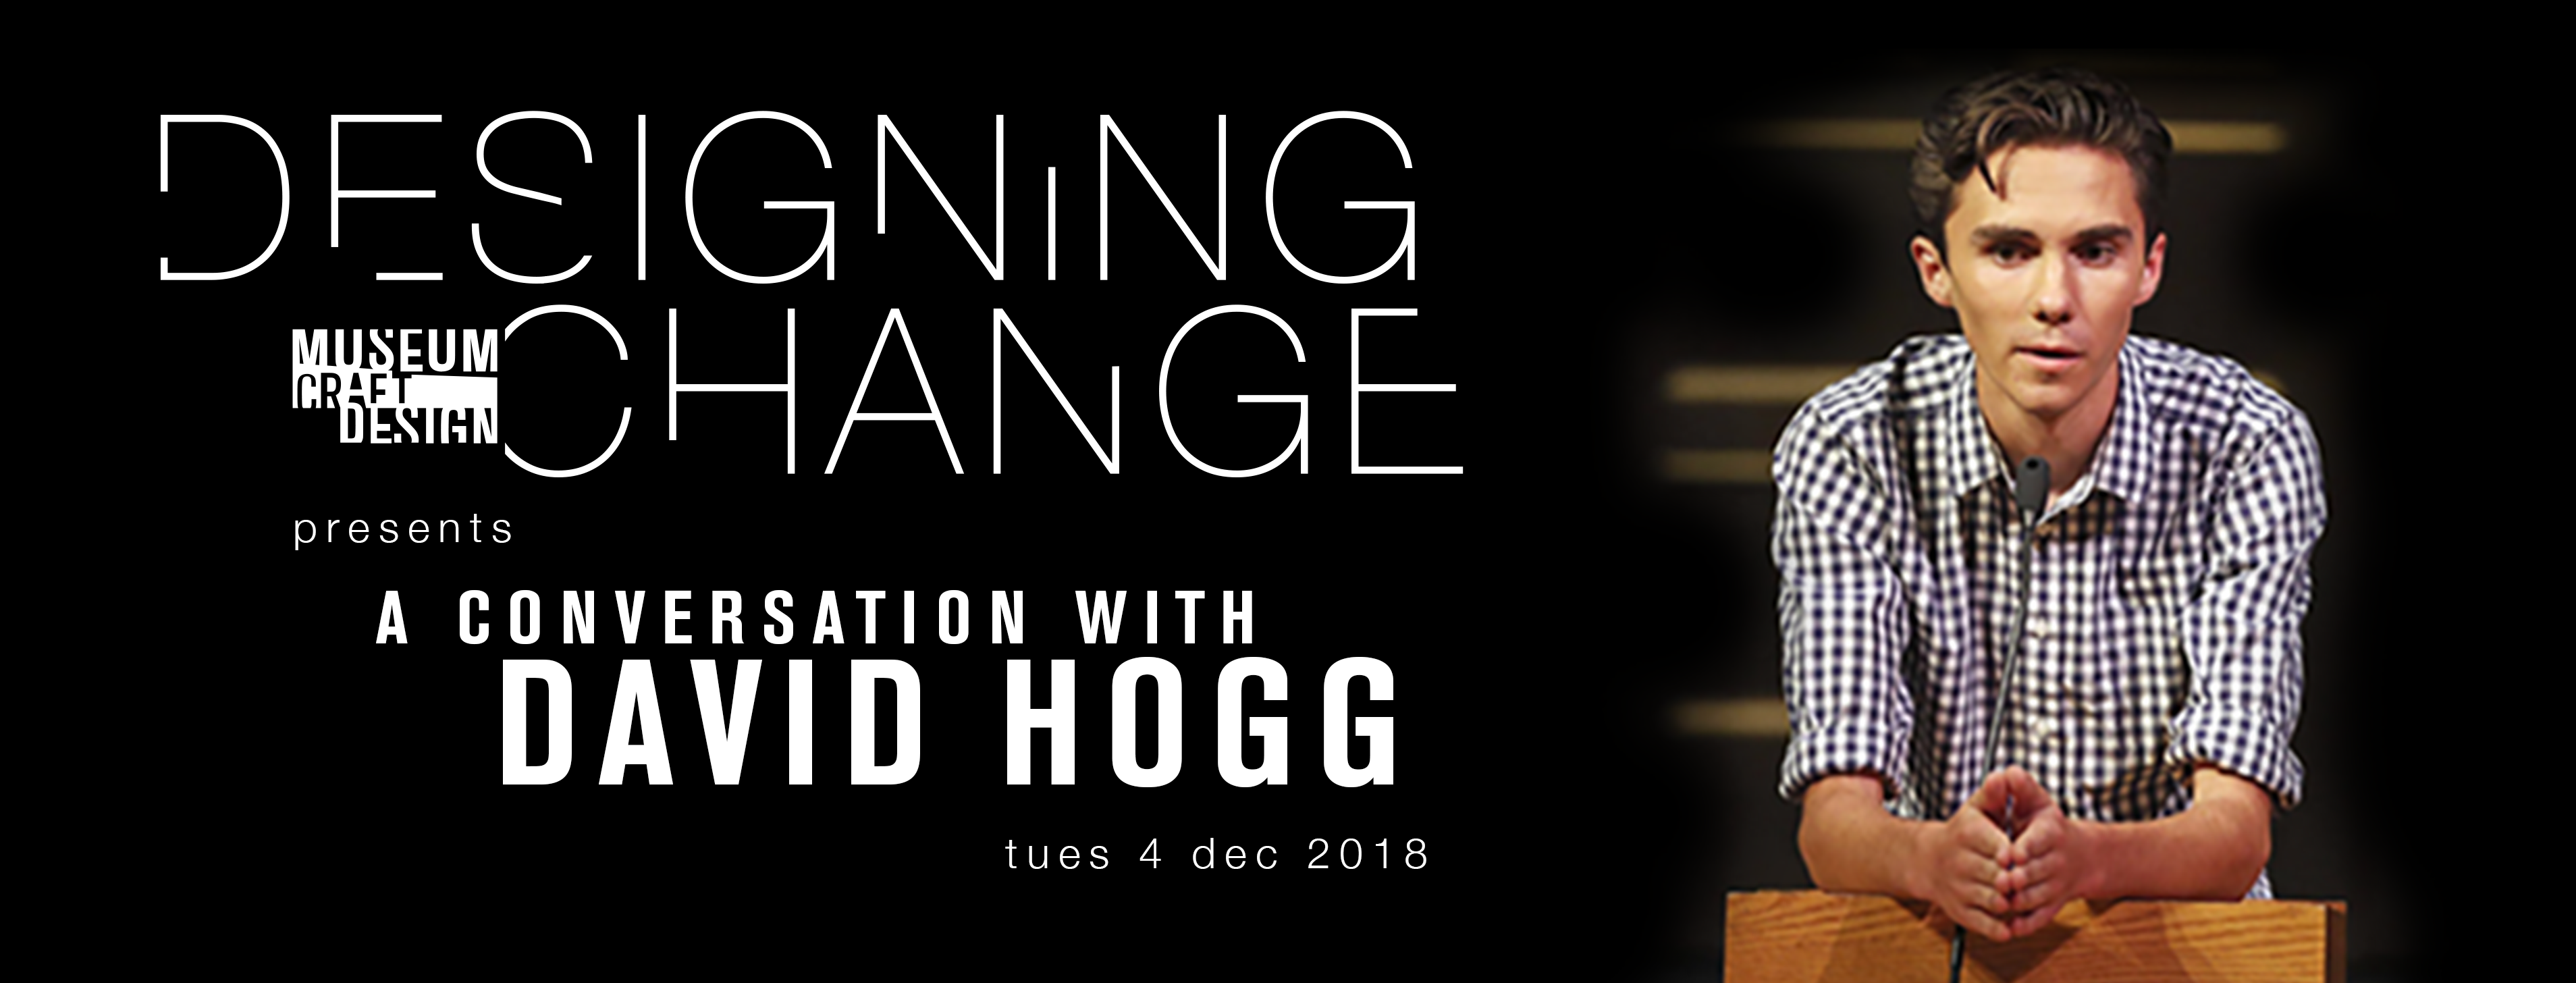 Designing Change with David Hogg at Museum of Craft and Design